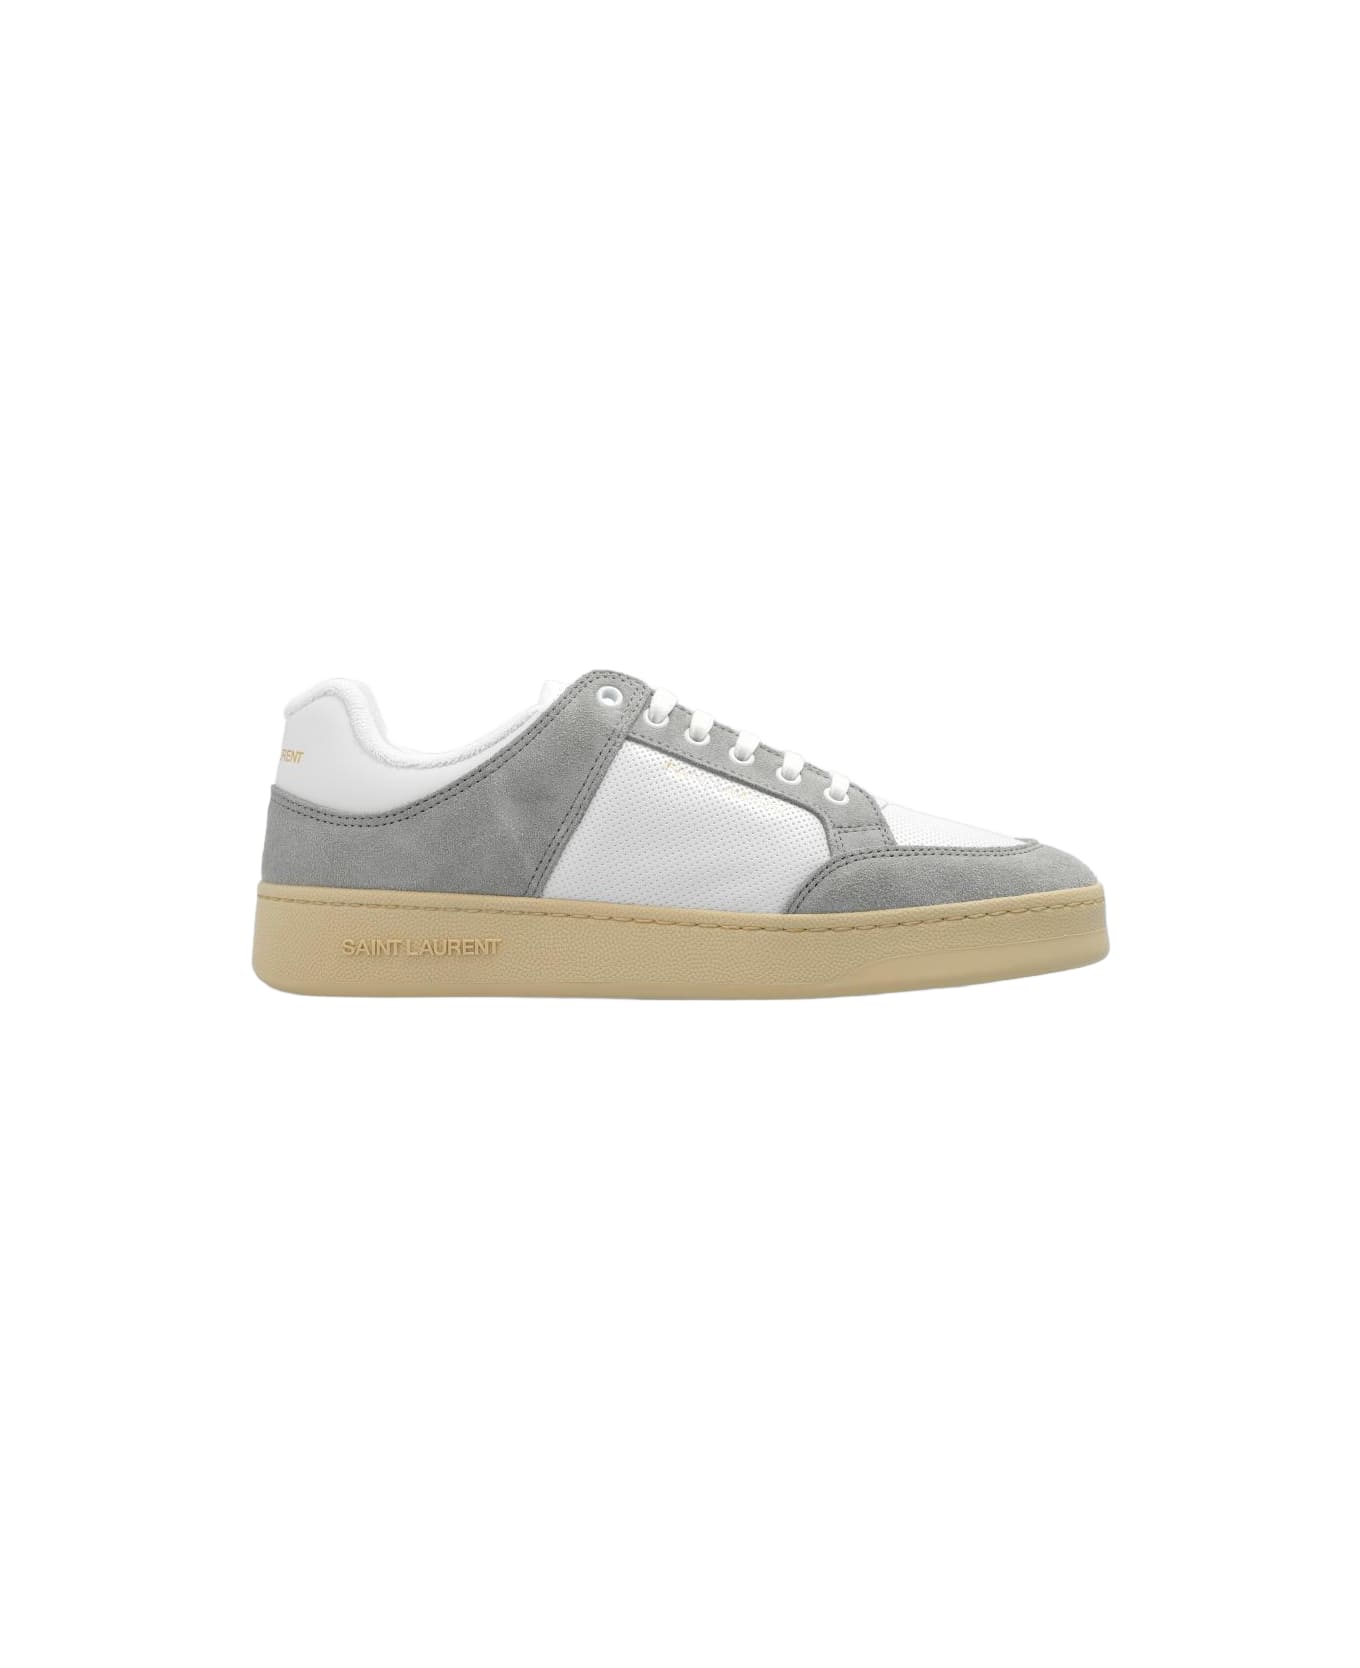 sl/61 sneakers in leather and suede